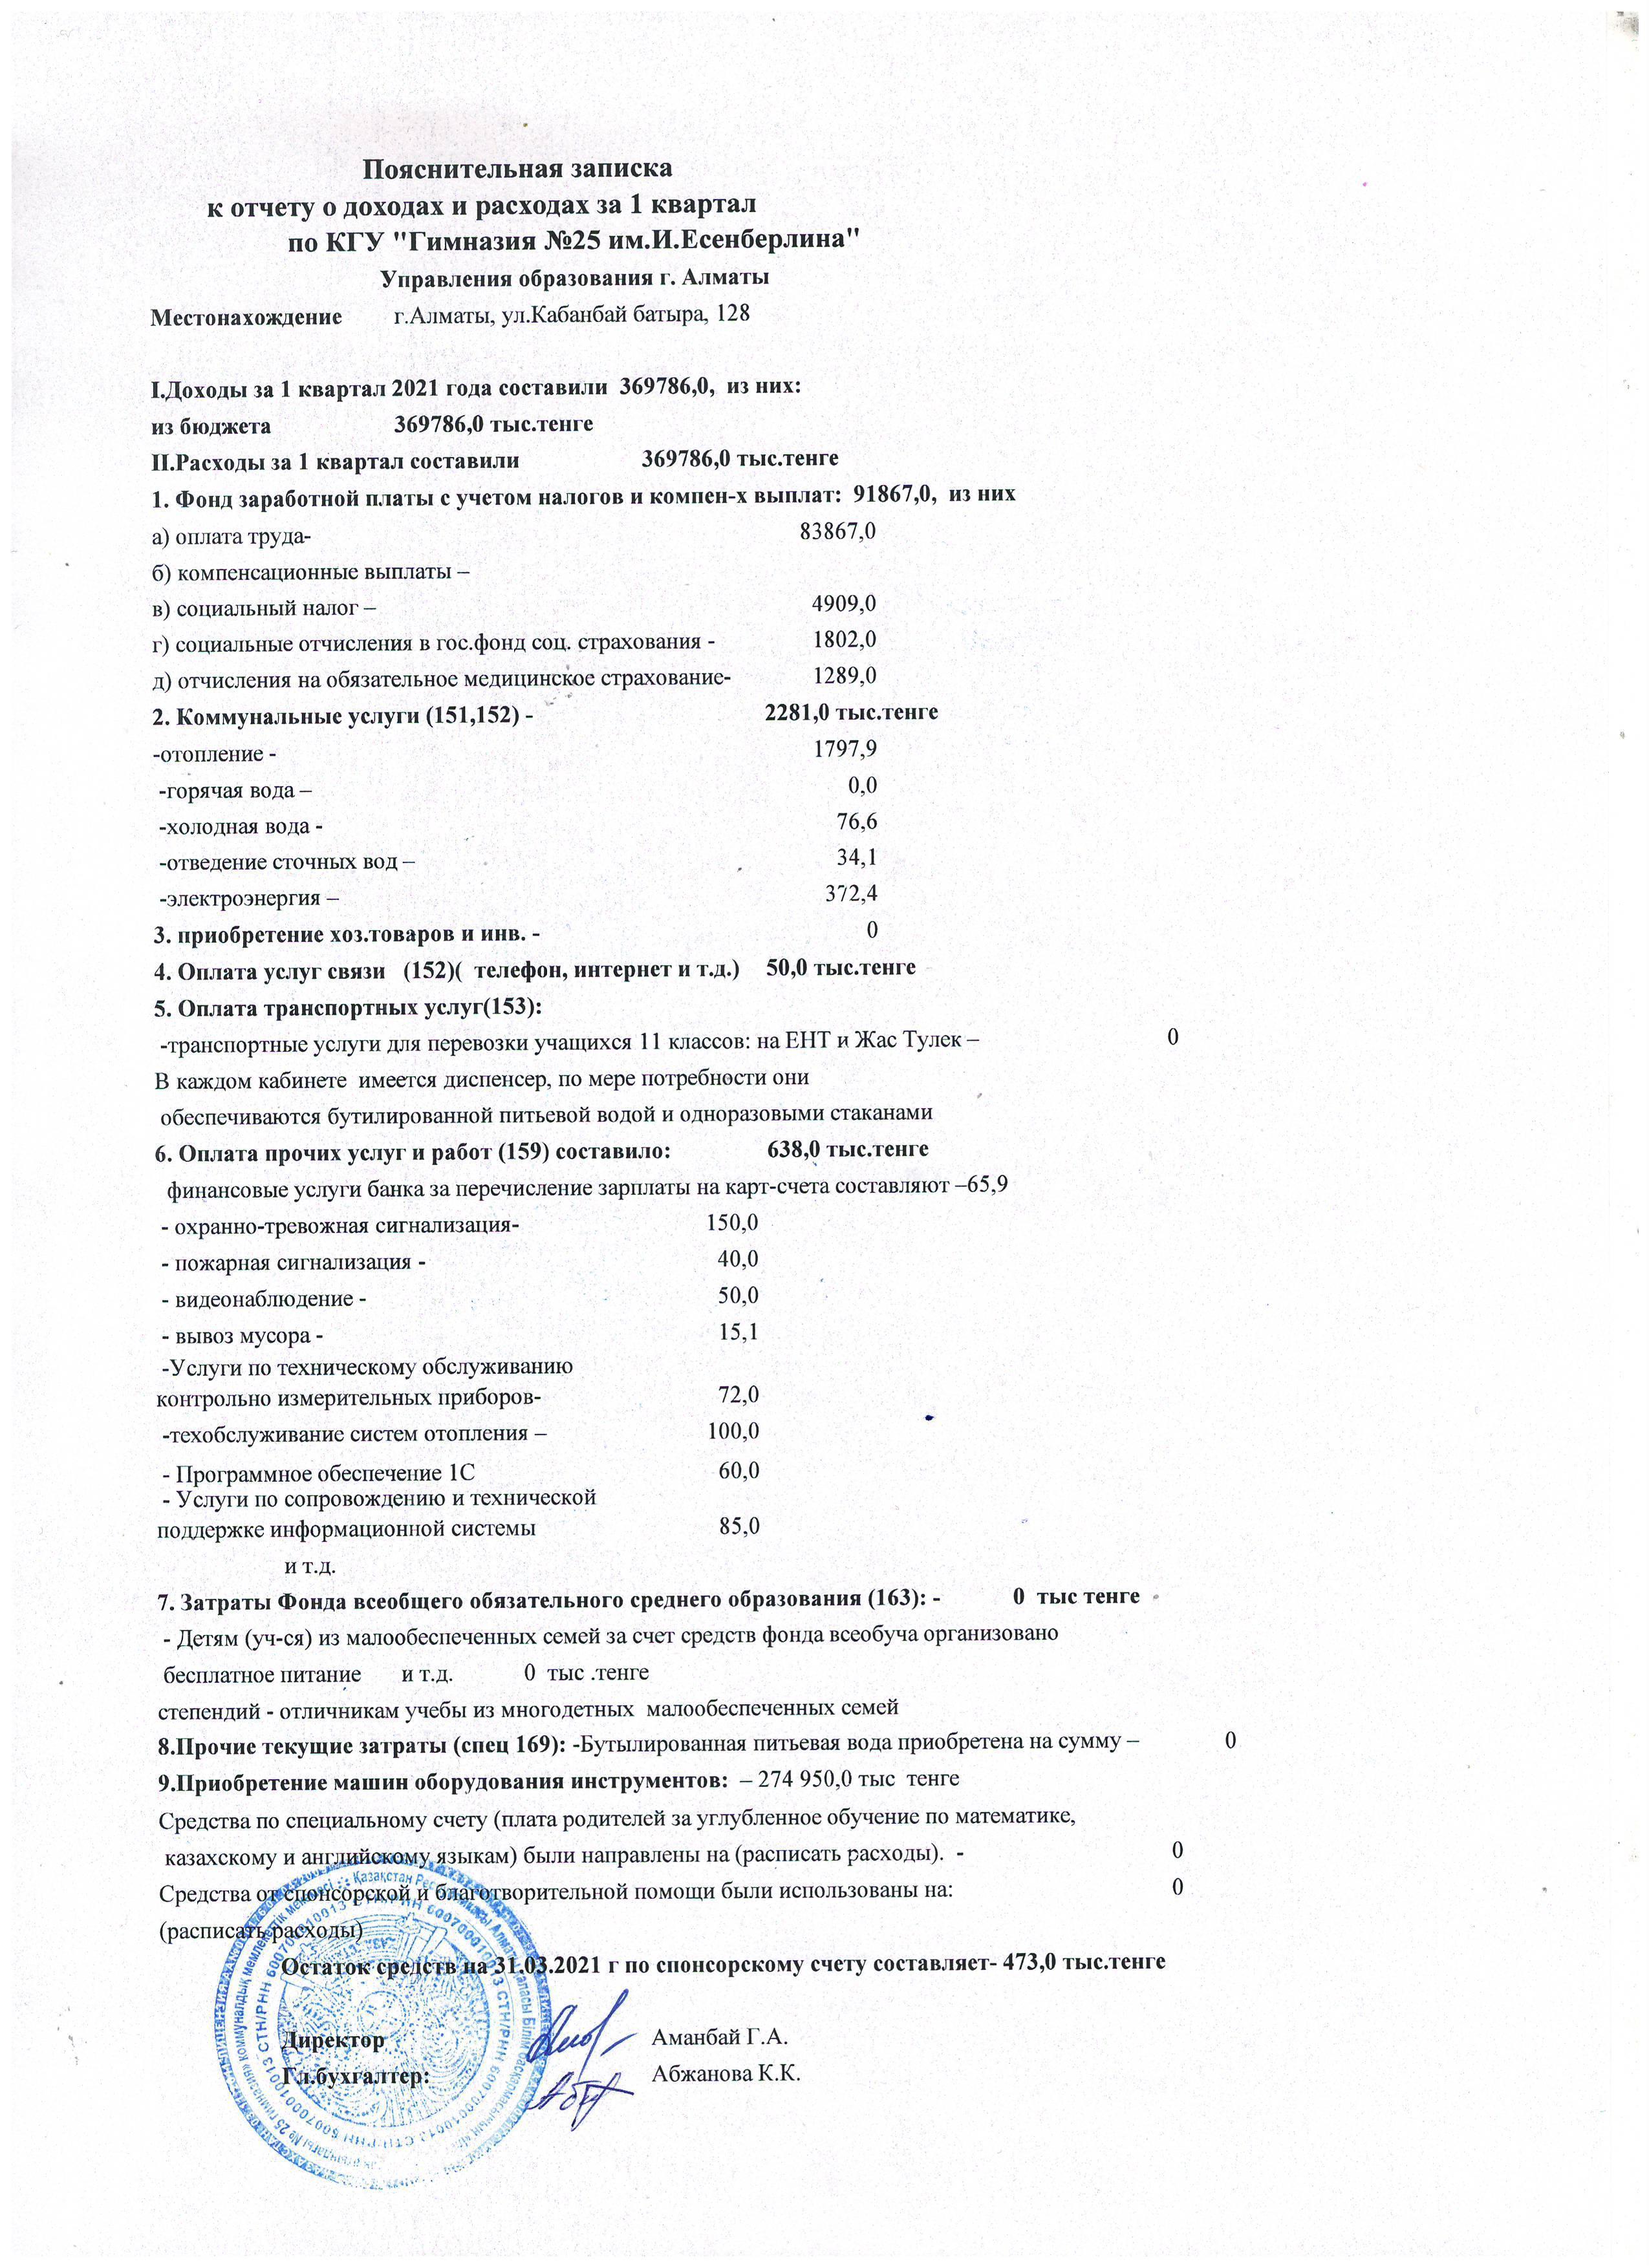 Statement of income and expenses за 1 квартал 2021 года